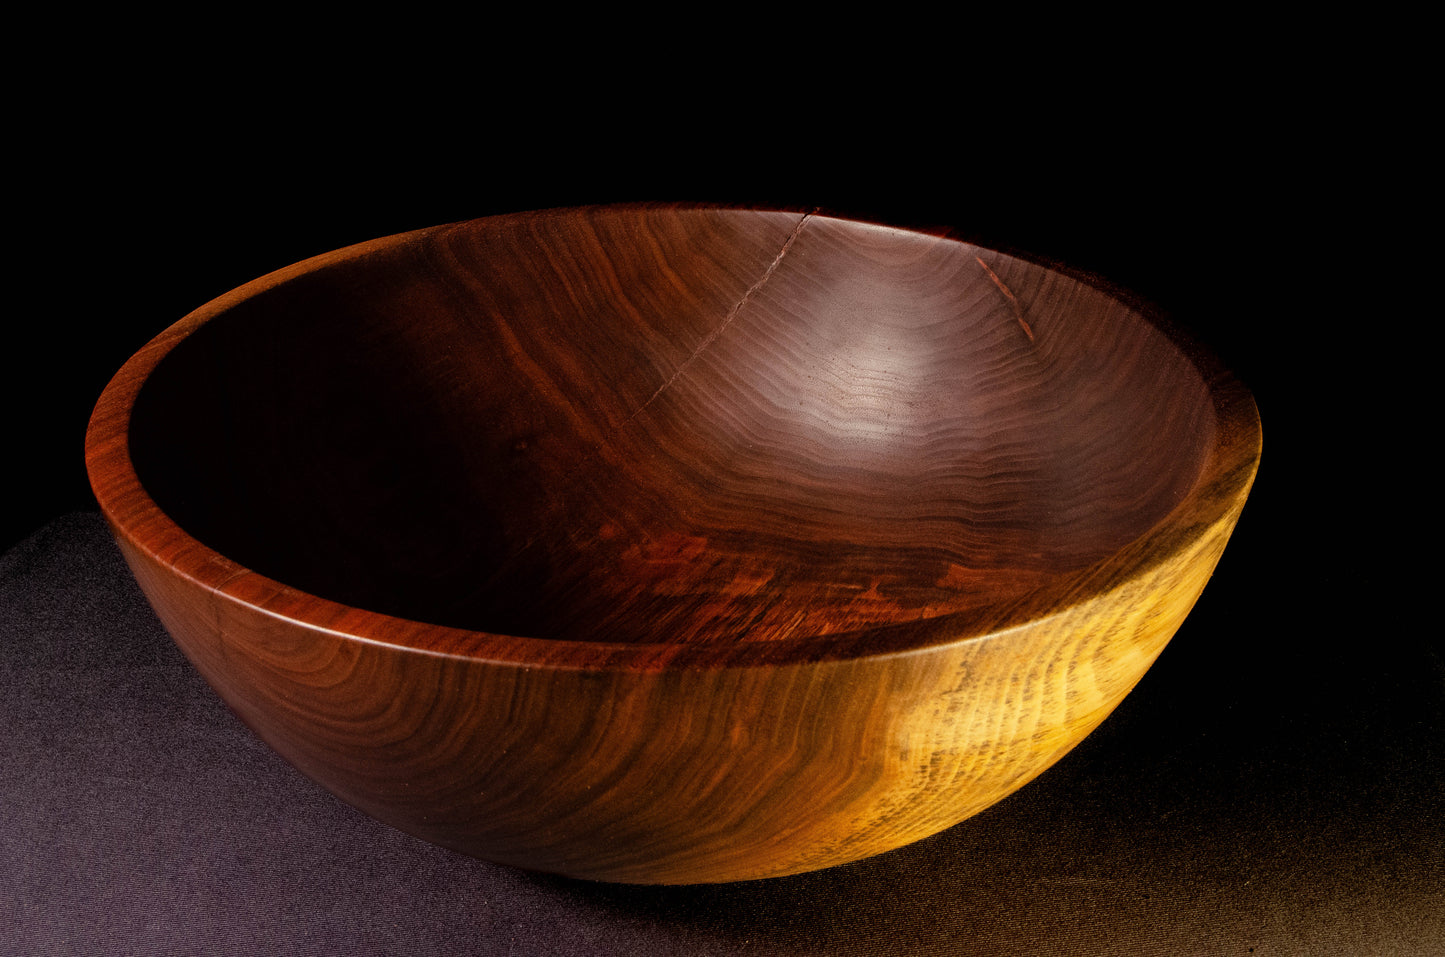 Black walnut bowl with rich grain structure and tonality. Crack on one side mended with bowties. Beautiful sald, fruit or popcorn bowl. Makes a wonderful gift for home, wedding, or occasion.